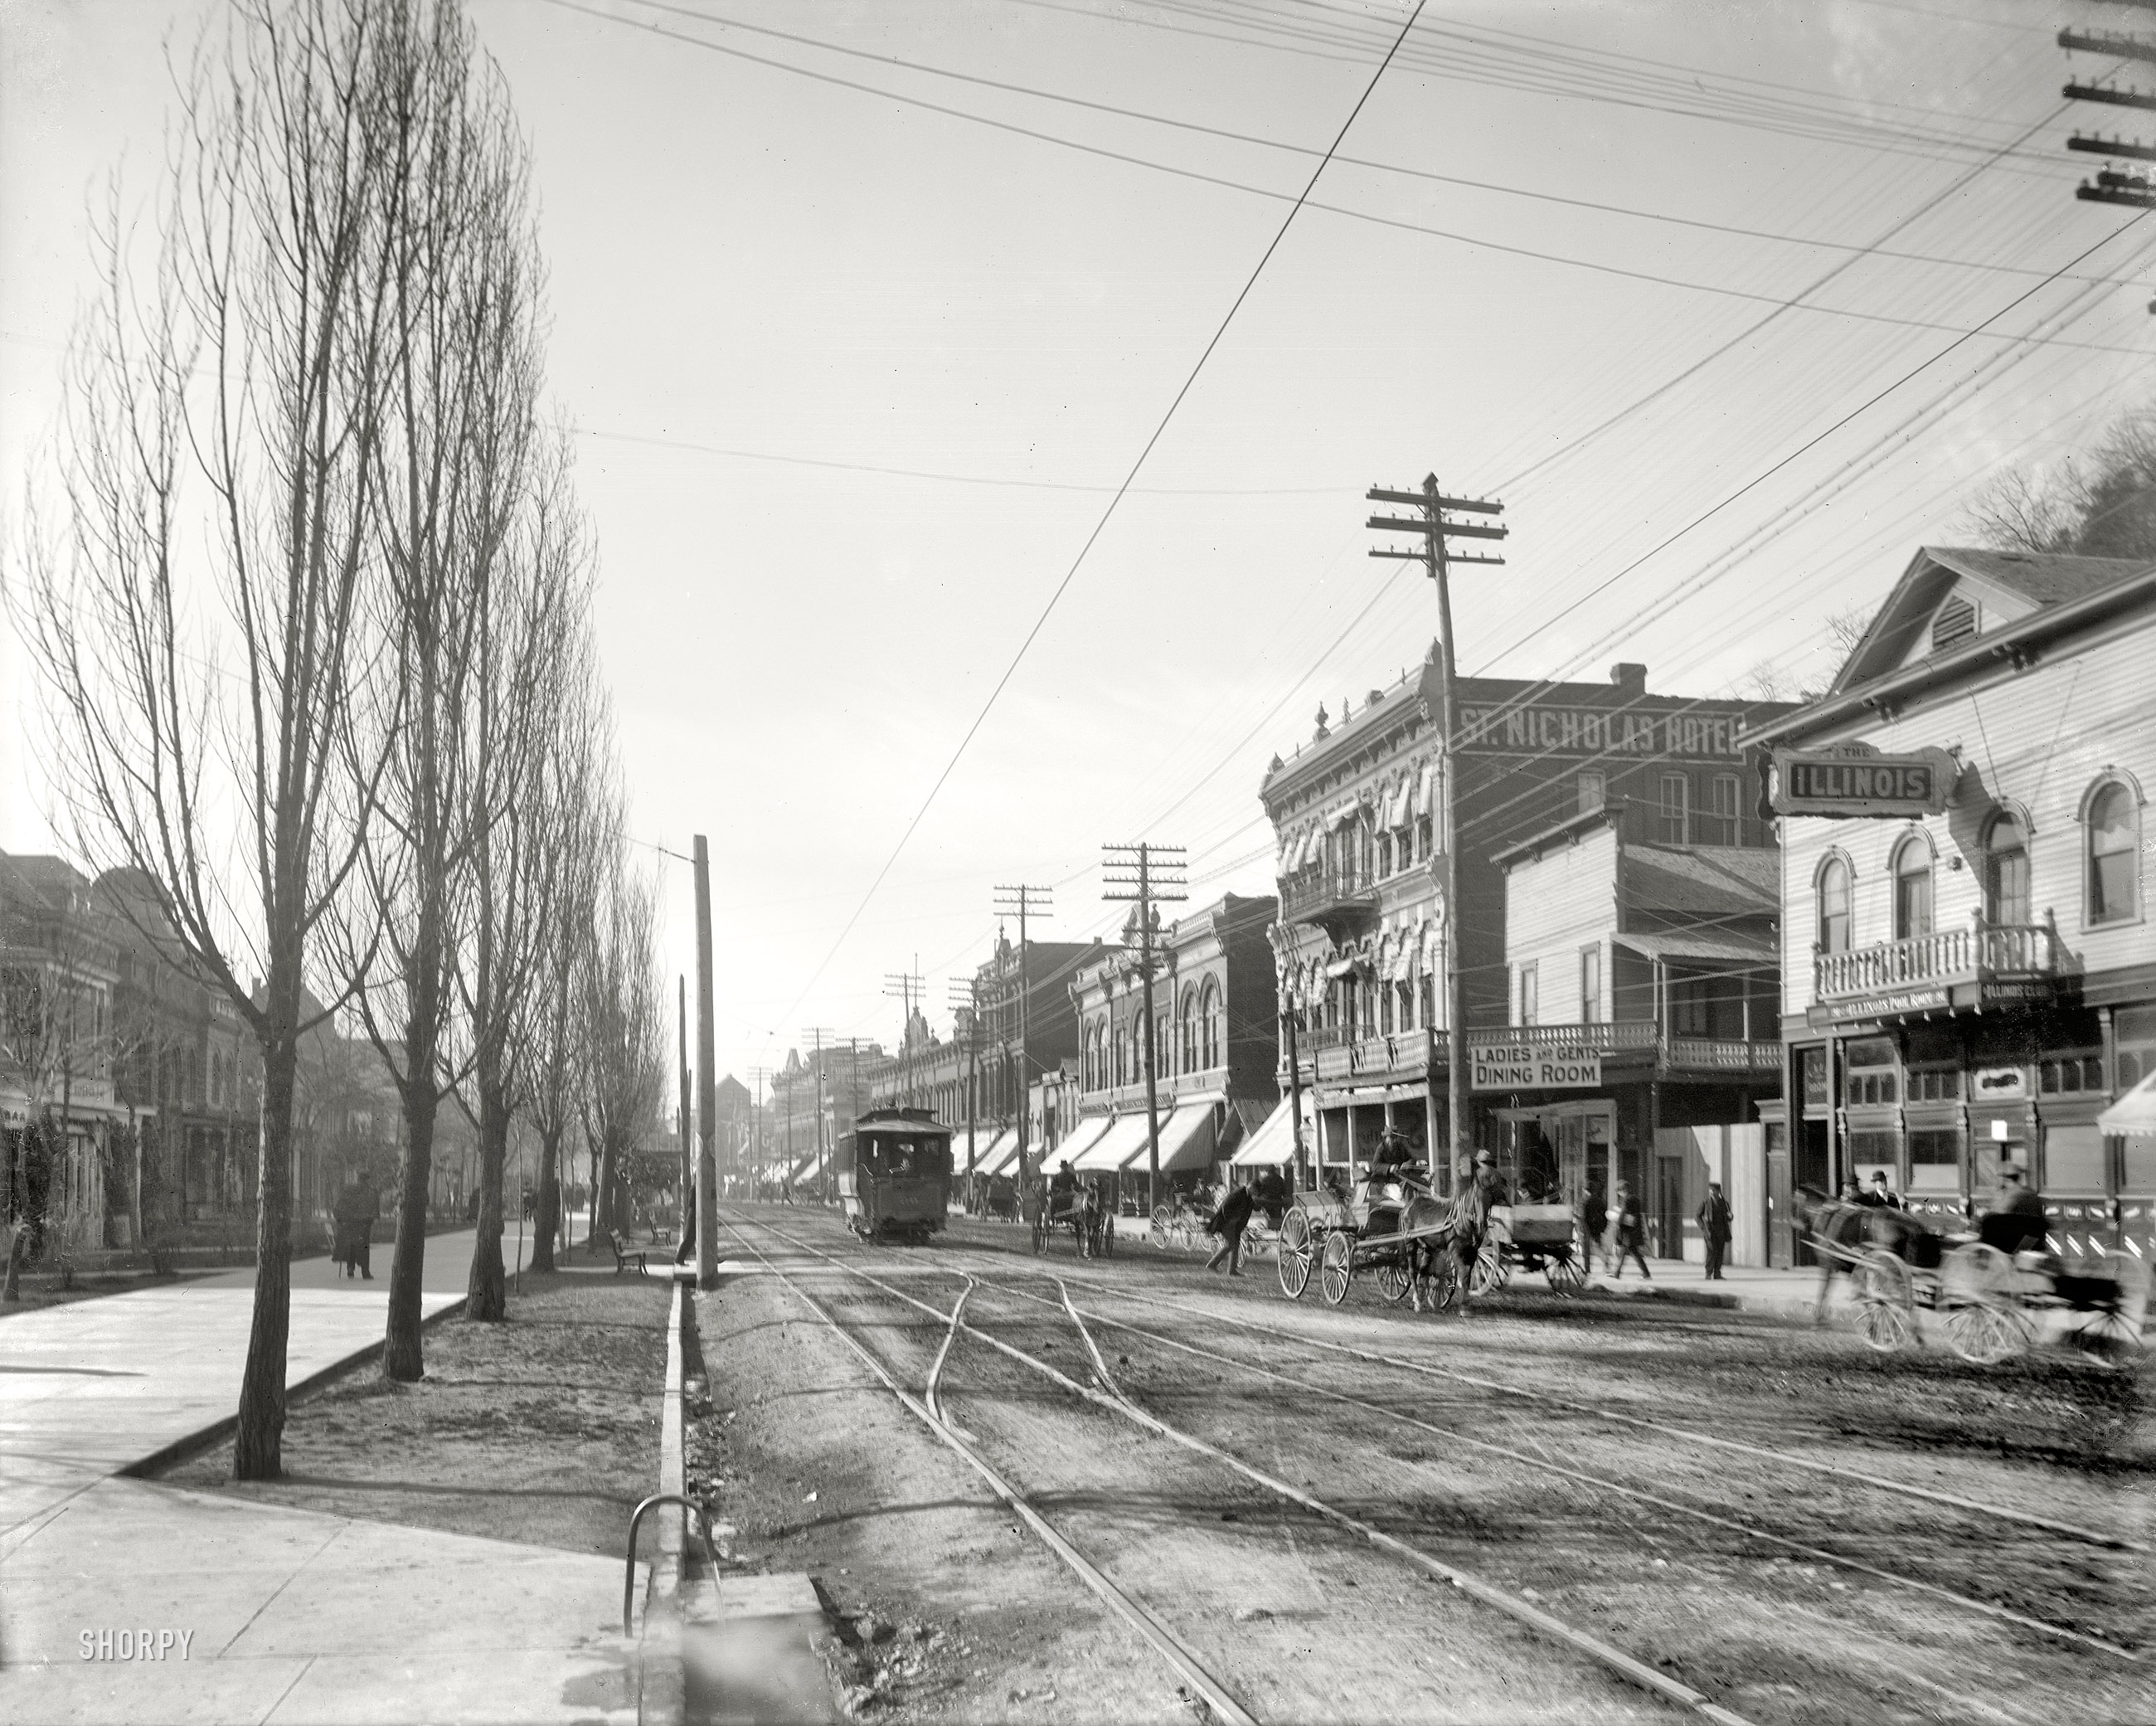 Circa 1900. "Central Avenue, Hot Springs, Arkansas." Note the flowing tap in the foreground. 8x10 inch glass negative, Detroit Publishing Co. View full size.